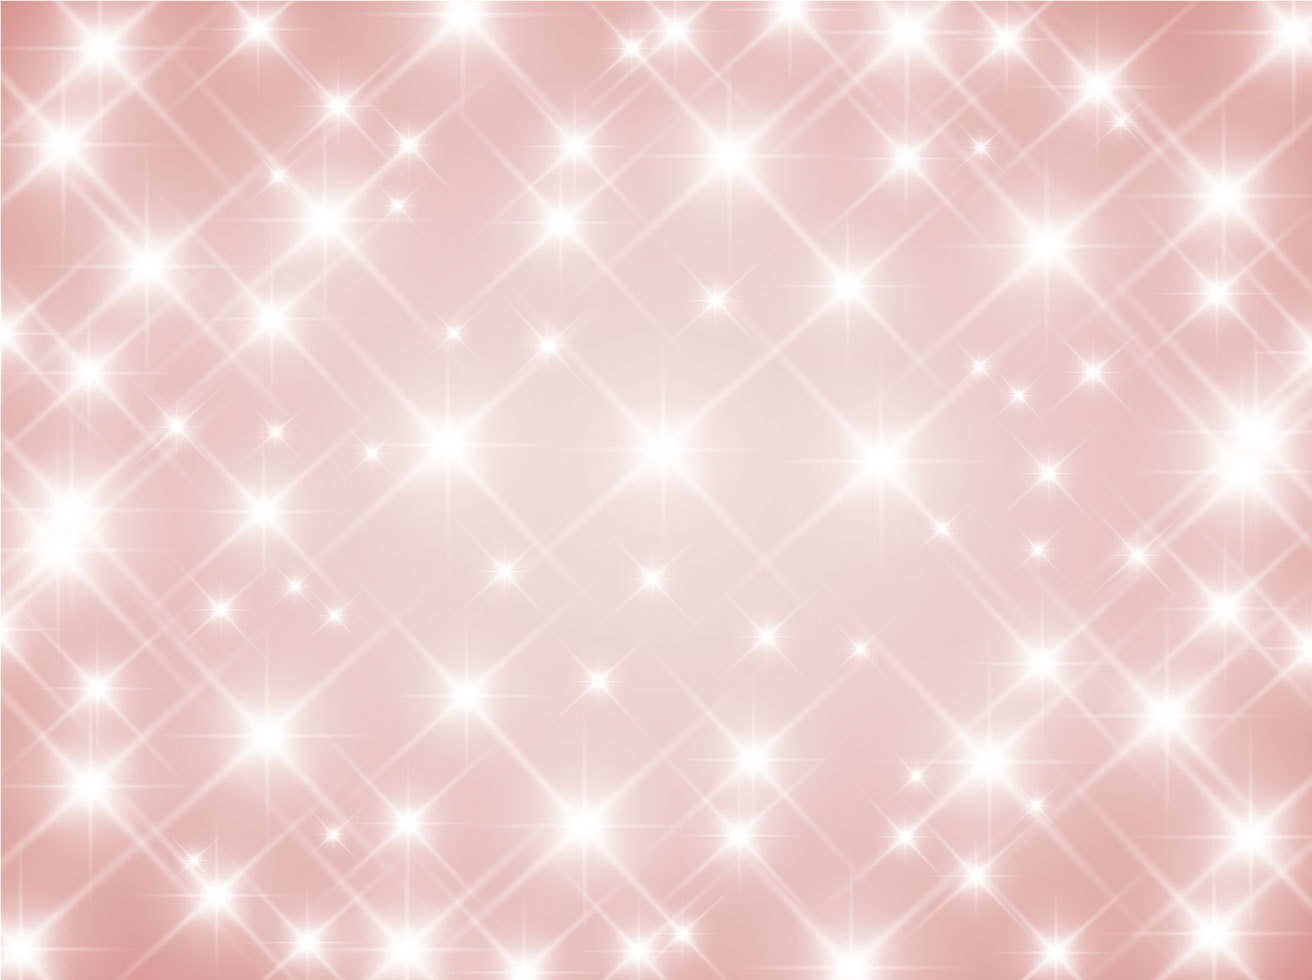 Beautiful Pink Sparkles Background Vector Art & Graphics | freevector.com